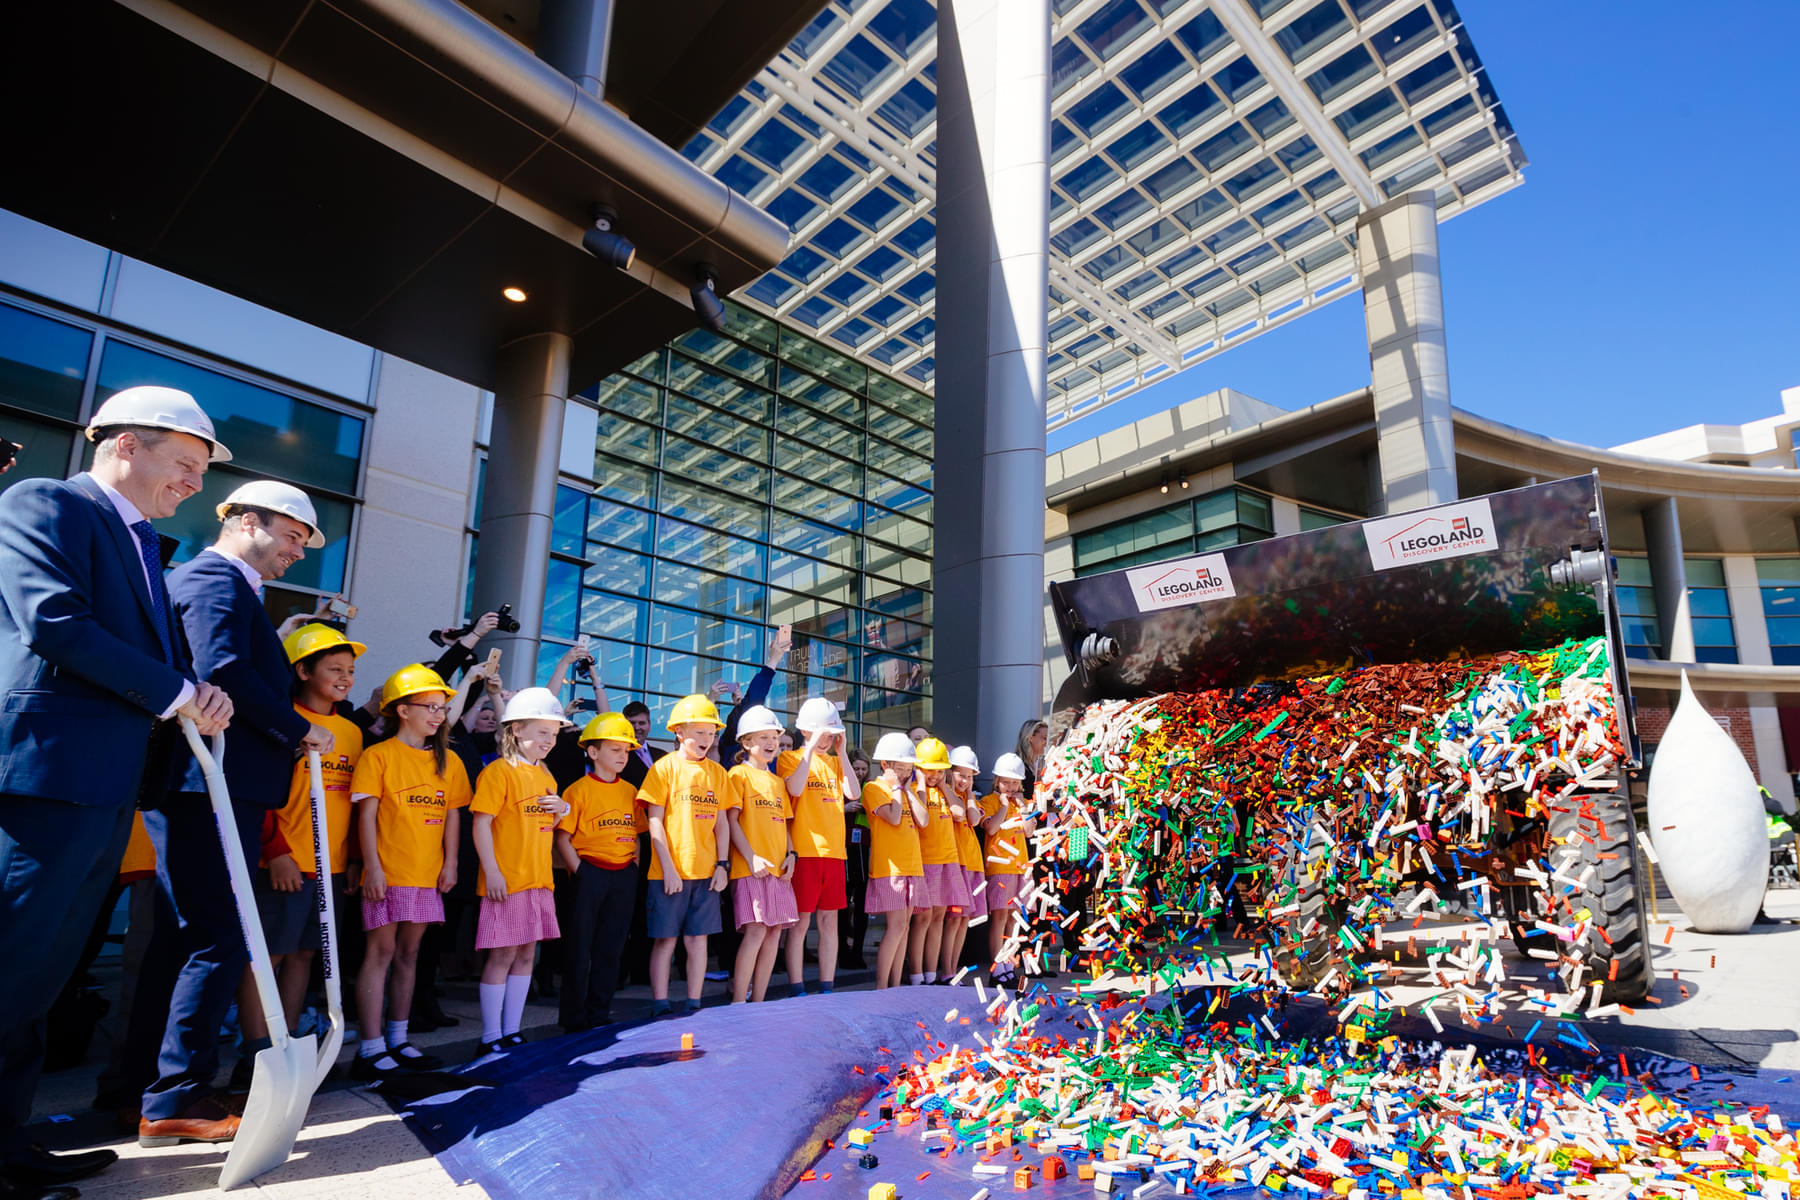 Discover the inner workings of the Lego factory.